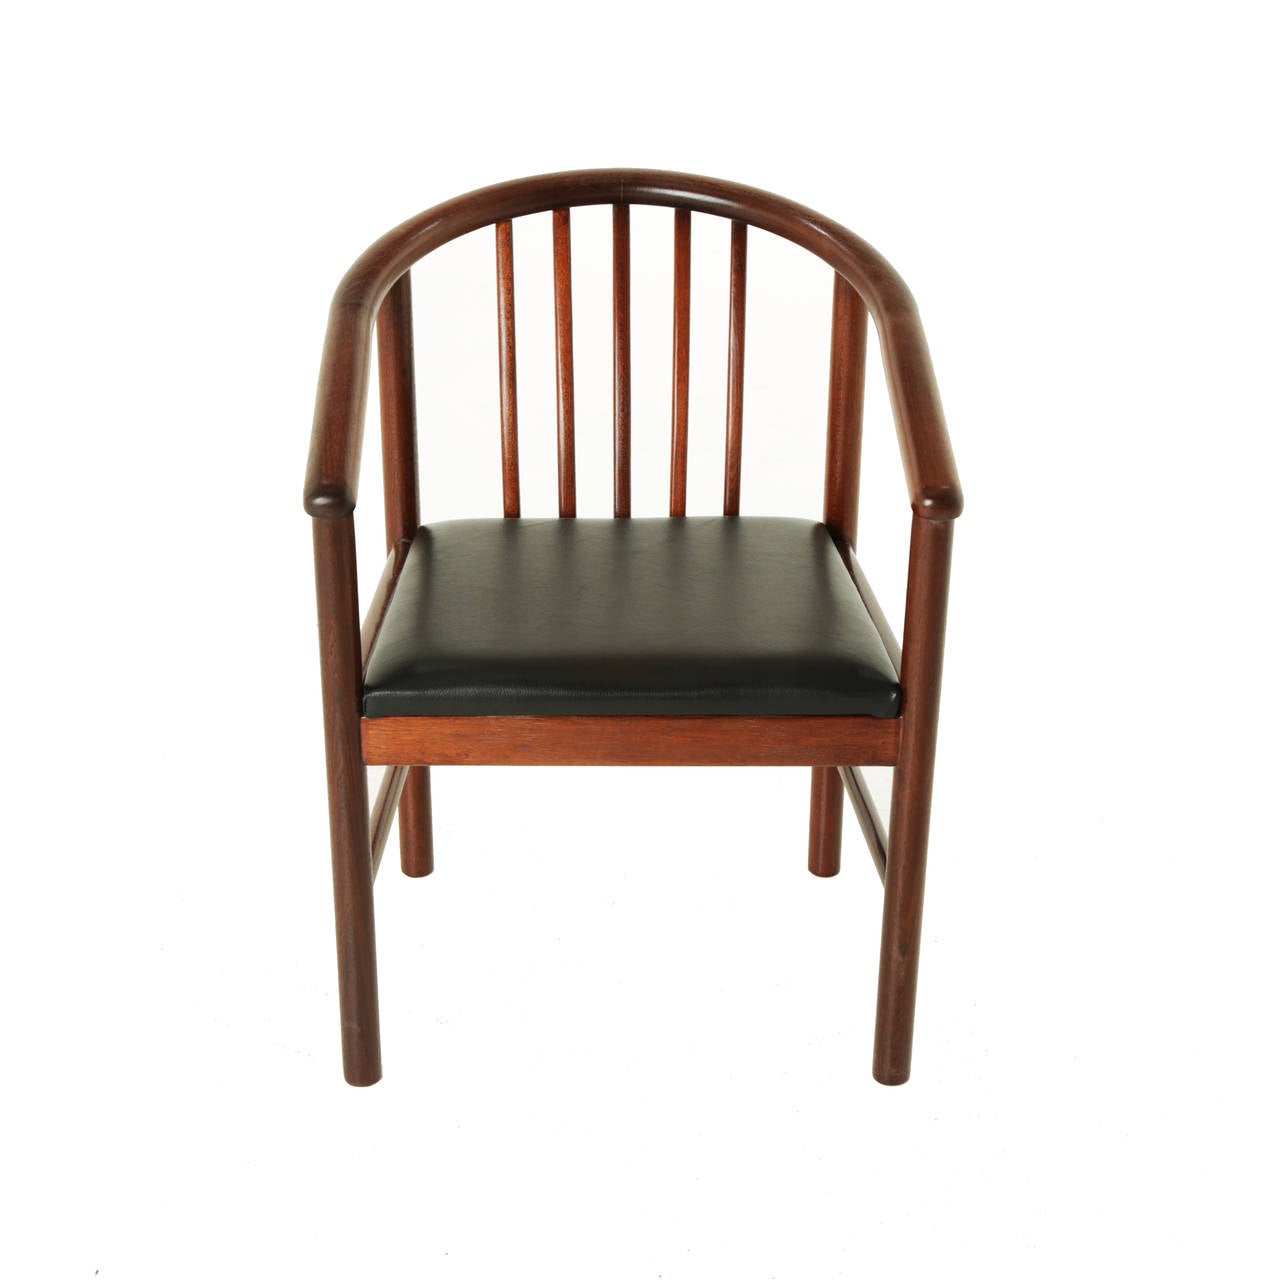 Mid-20th Century Vintage Brazilian Hardwood and Leather Curved Back Armchair For Sale